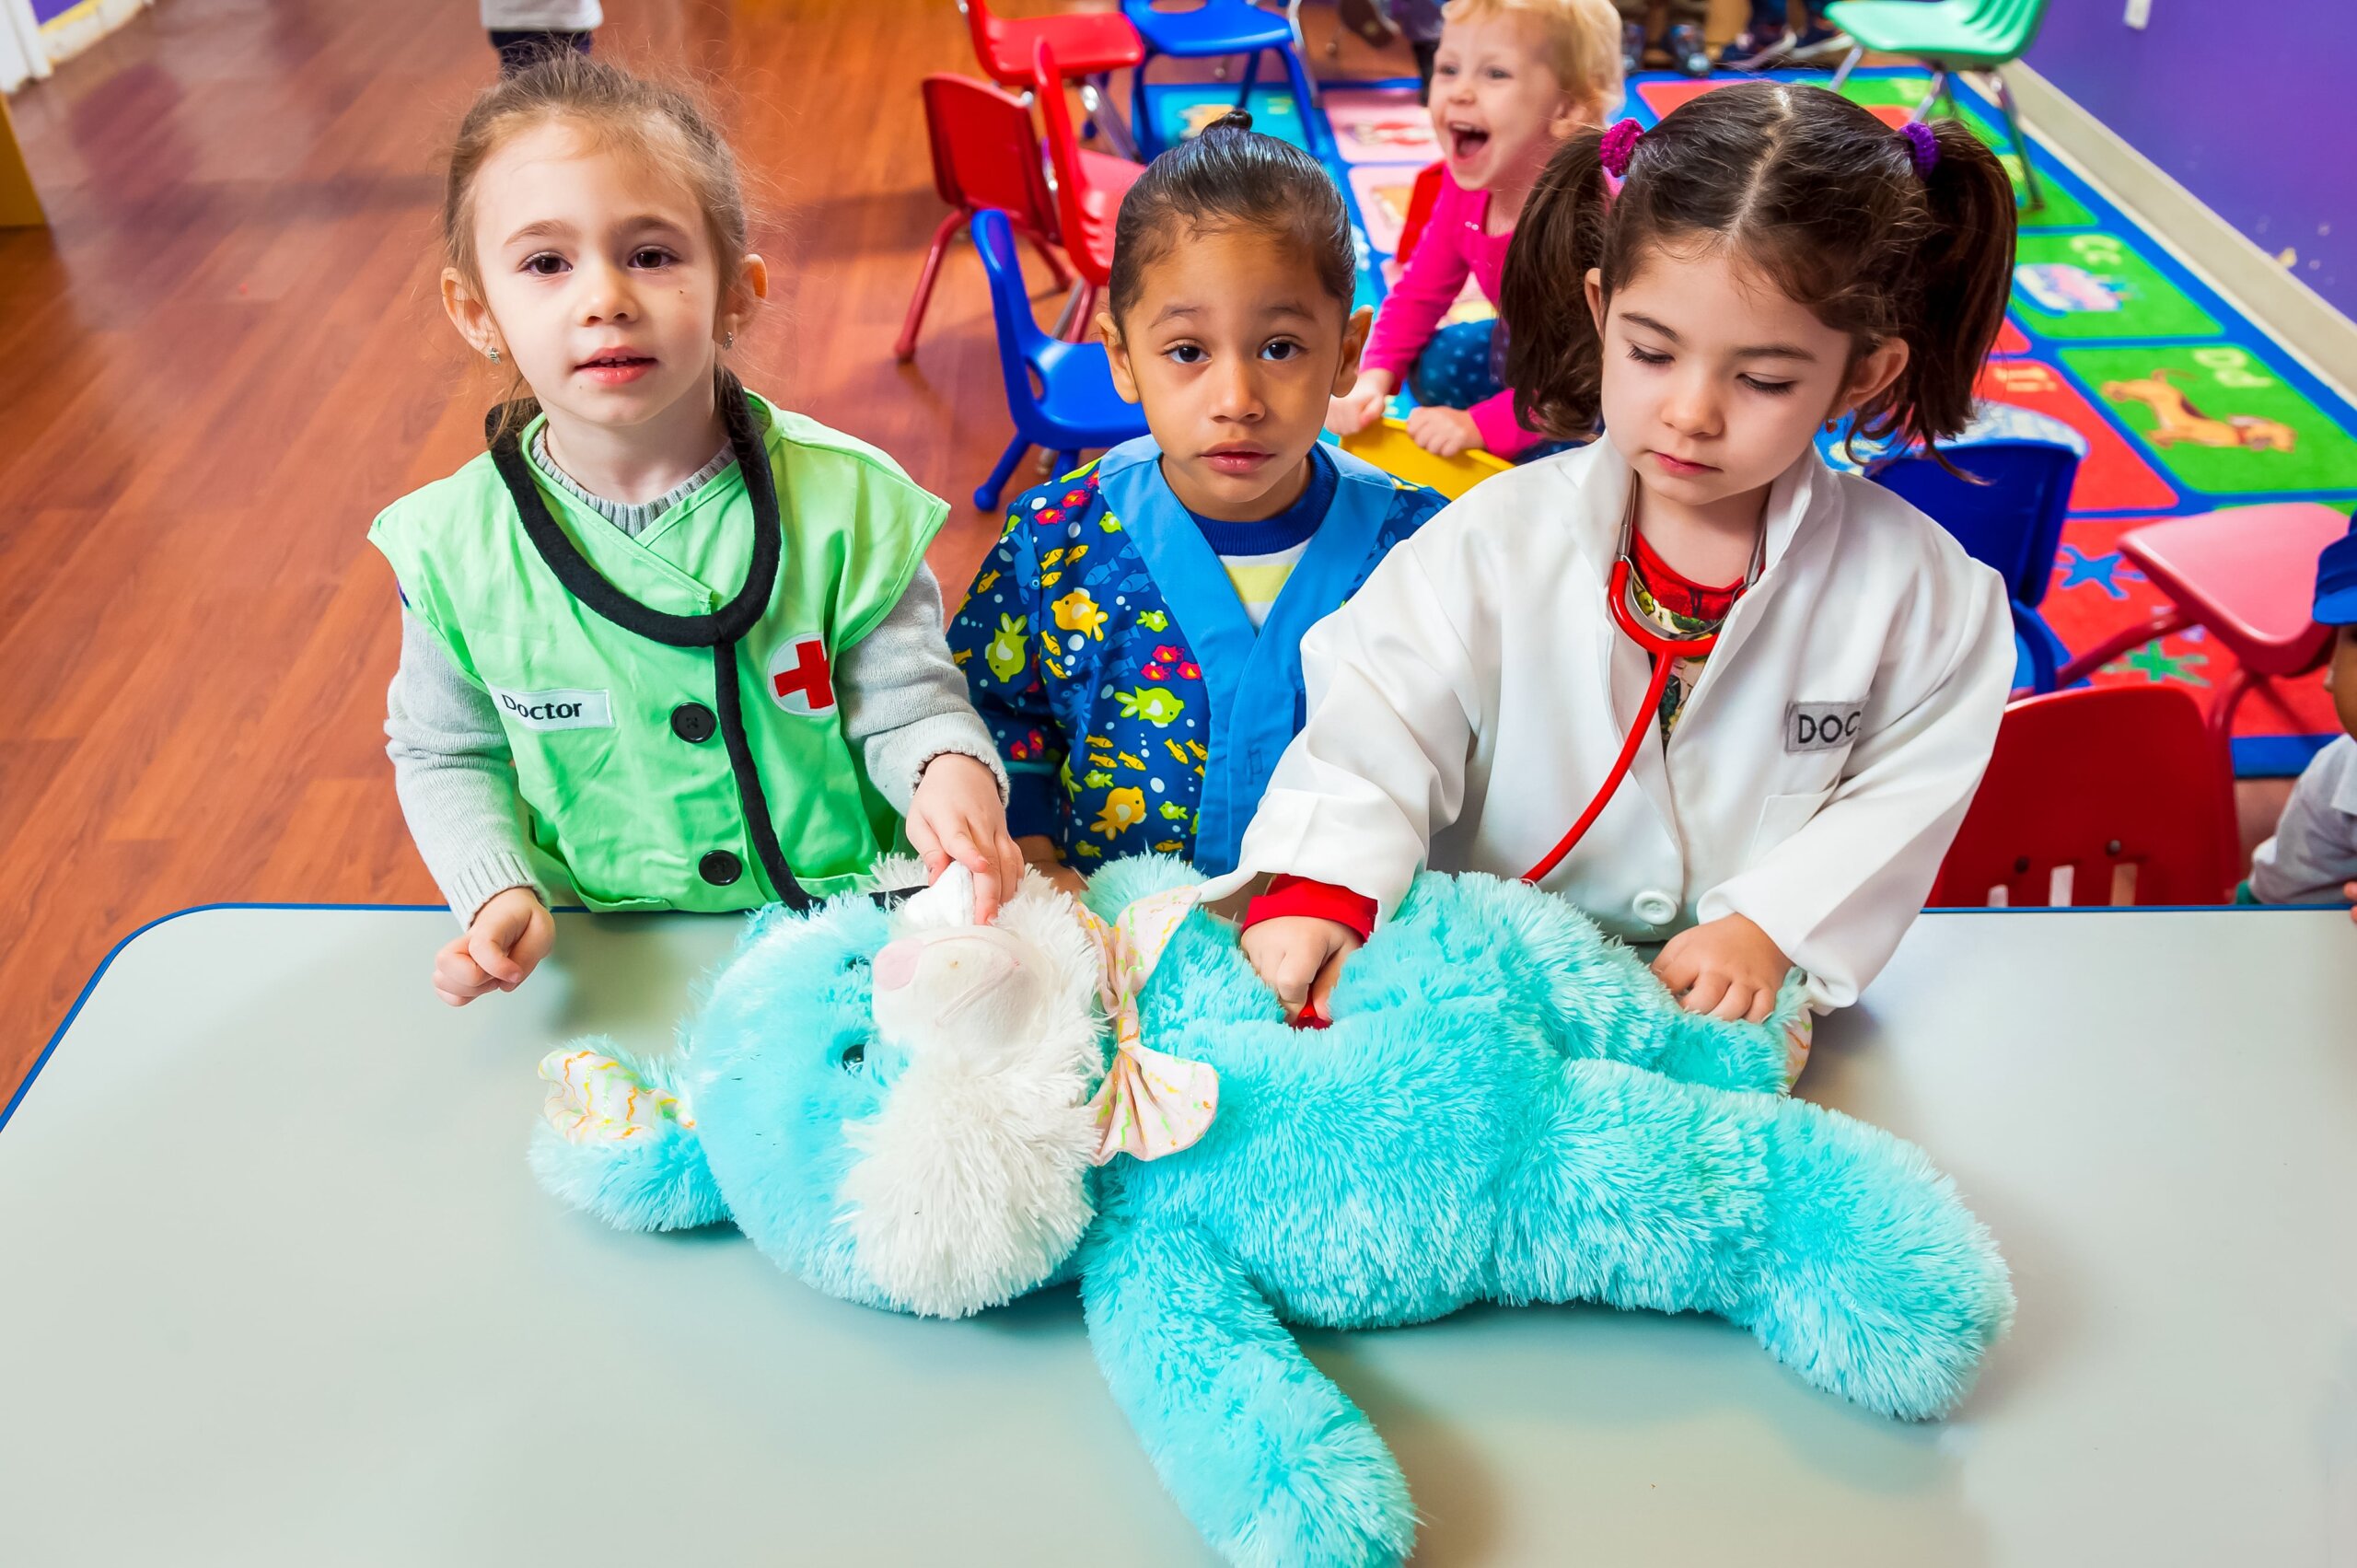 Children dressed as doctors practicing on a toy in a playful daycare environment.